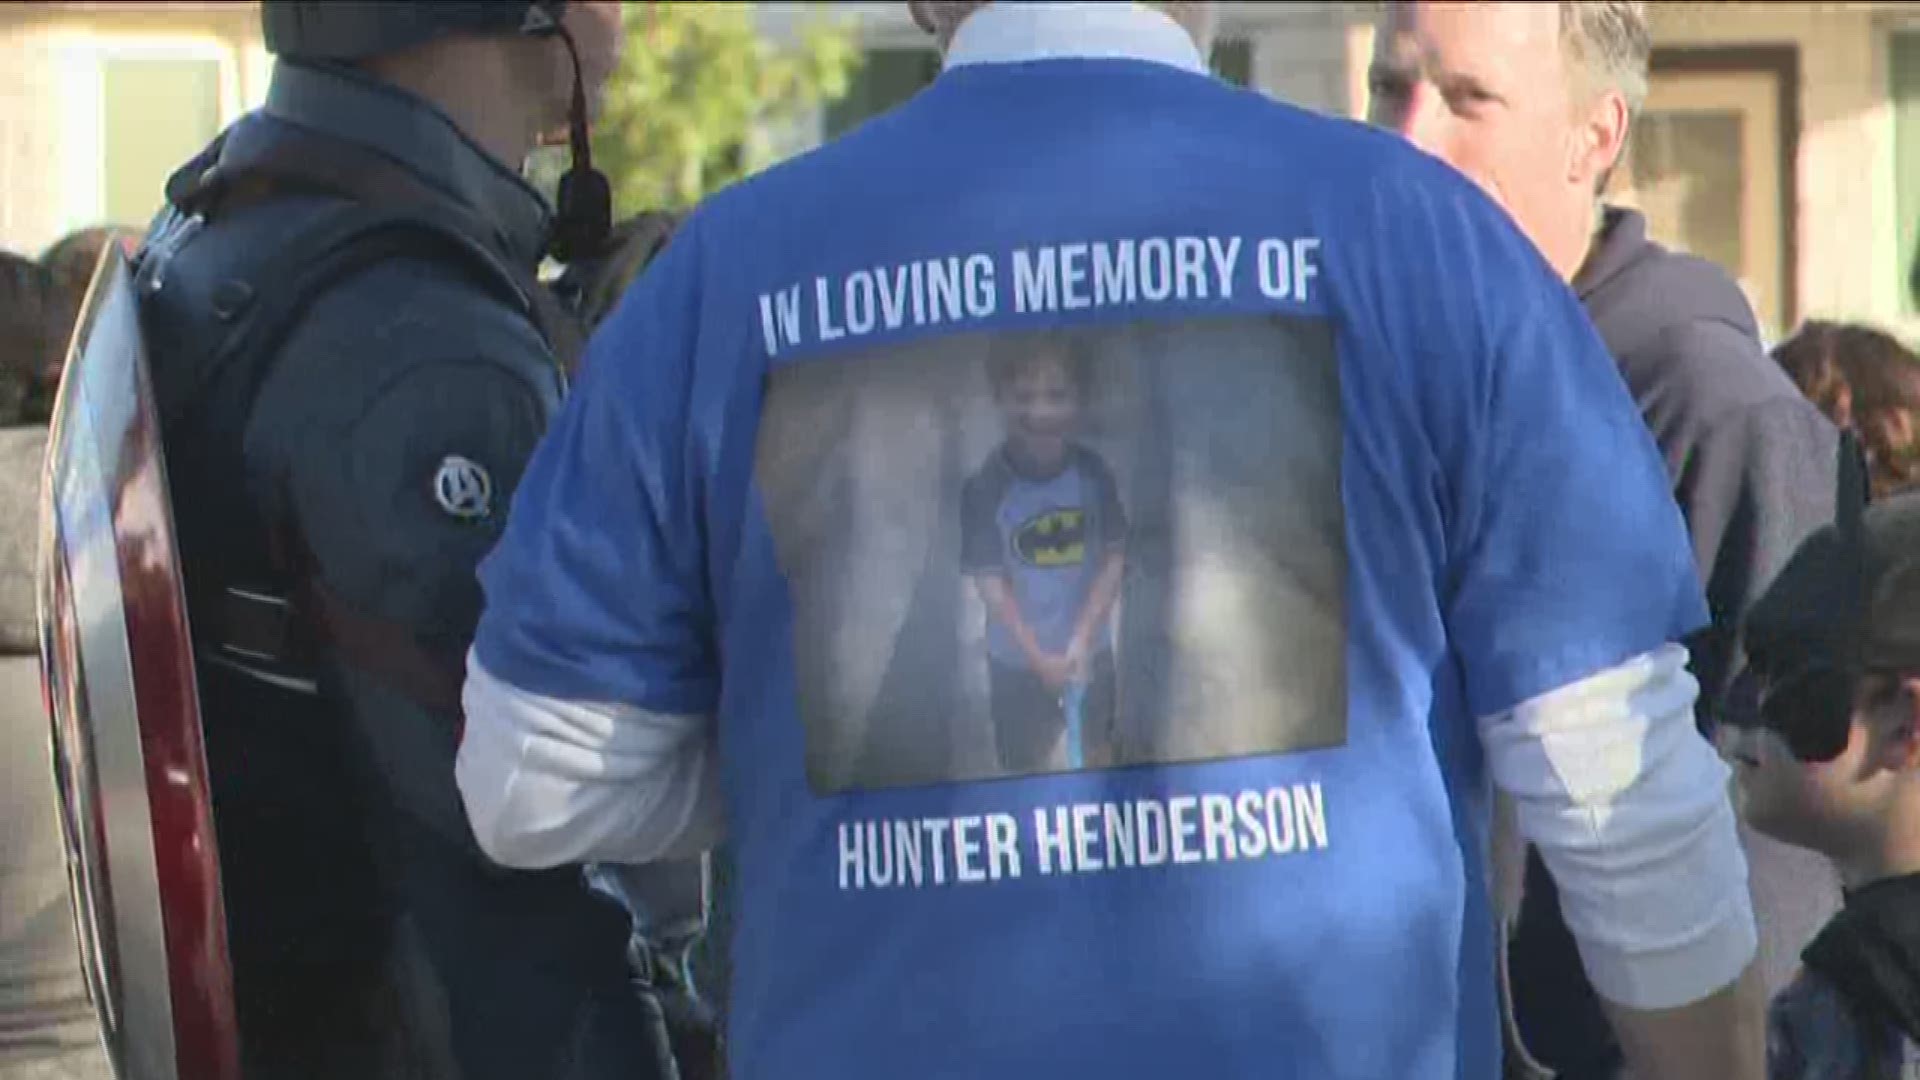 About 1,000 people turned out to honor the life of 4-year-old Hunter Henderson on Saturday morning in South Austin.